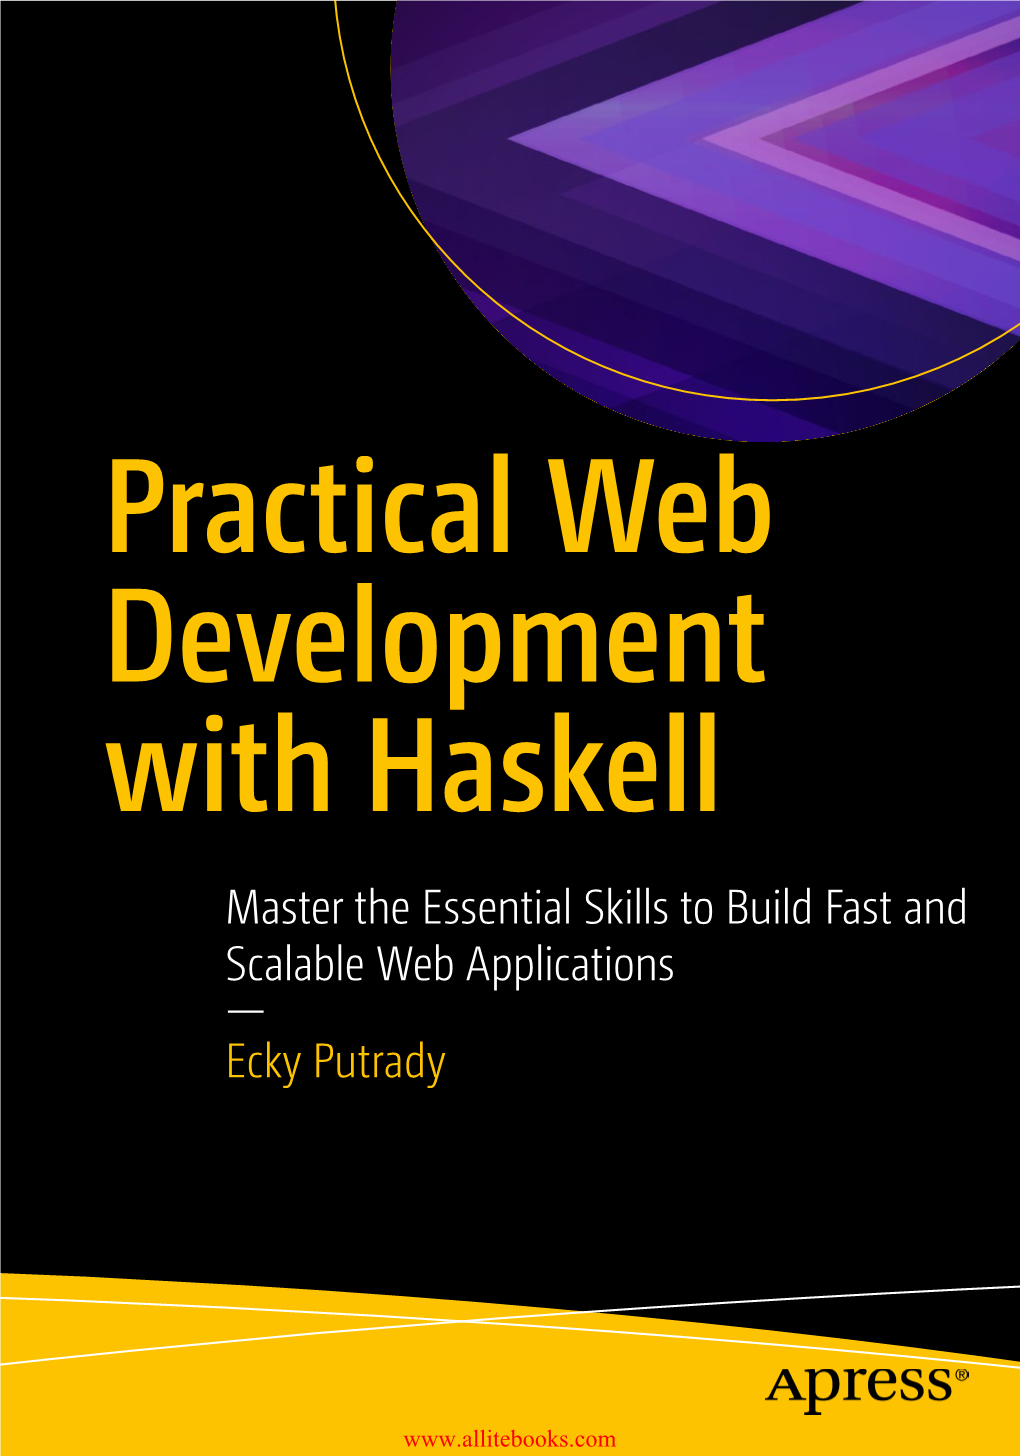 Practical Web Development with Haskell Master the Essential Skills to Build Fast and Scalable Web Applications — Ecky Putrady